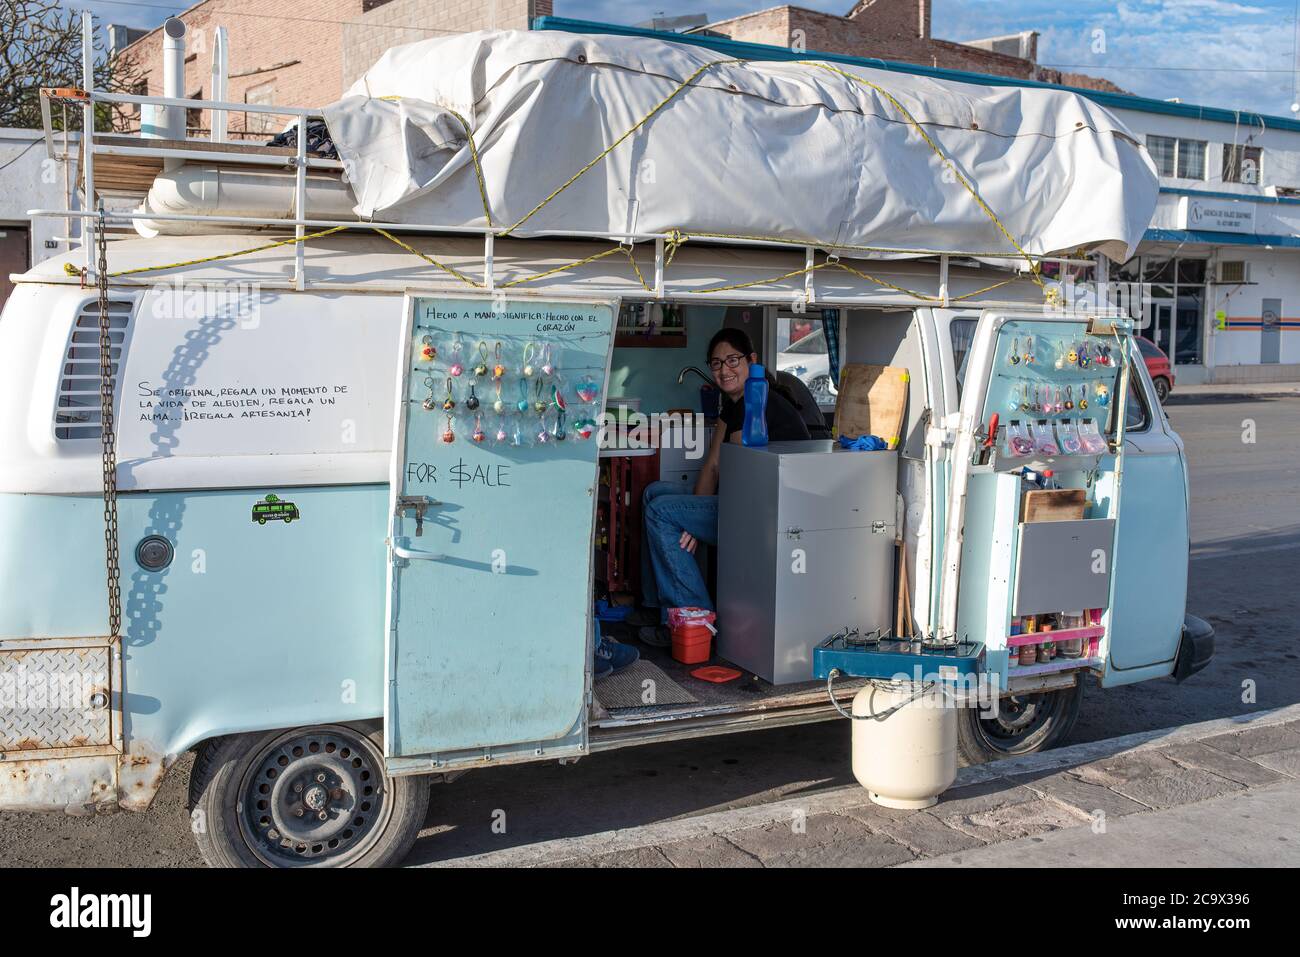 A young woman sells jewelry from her VW van parked along the street in downtown Guaymas, Sonora, Mexico. Stock Photo